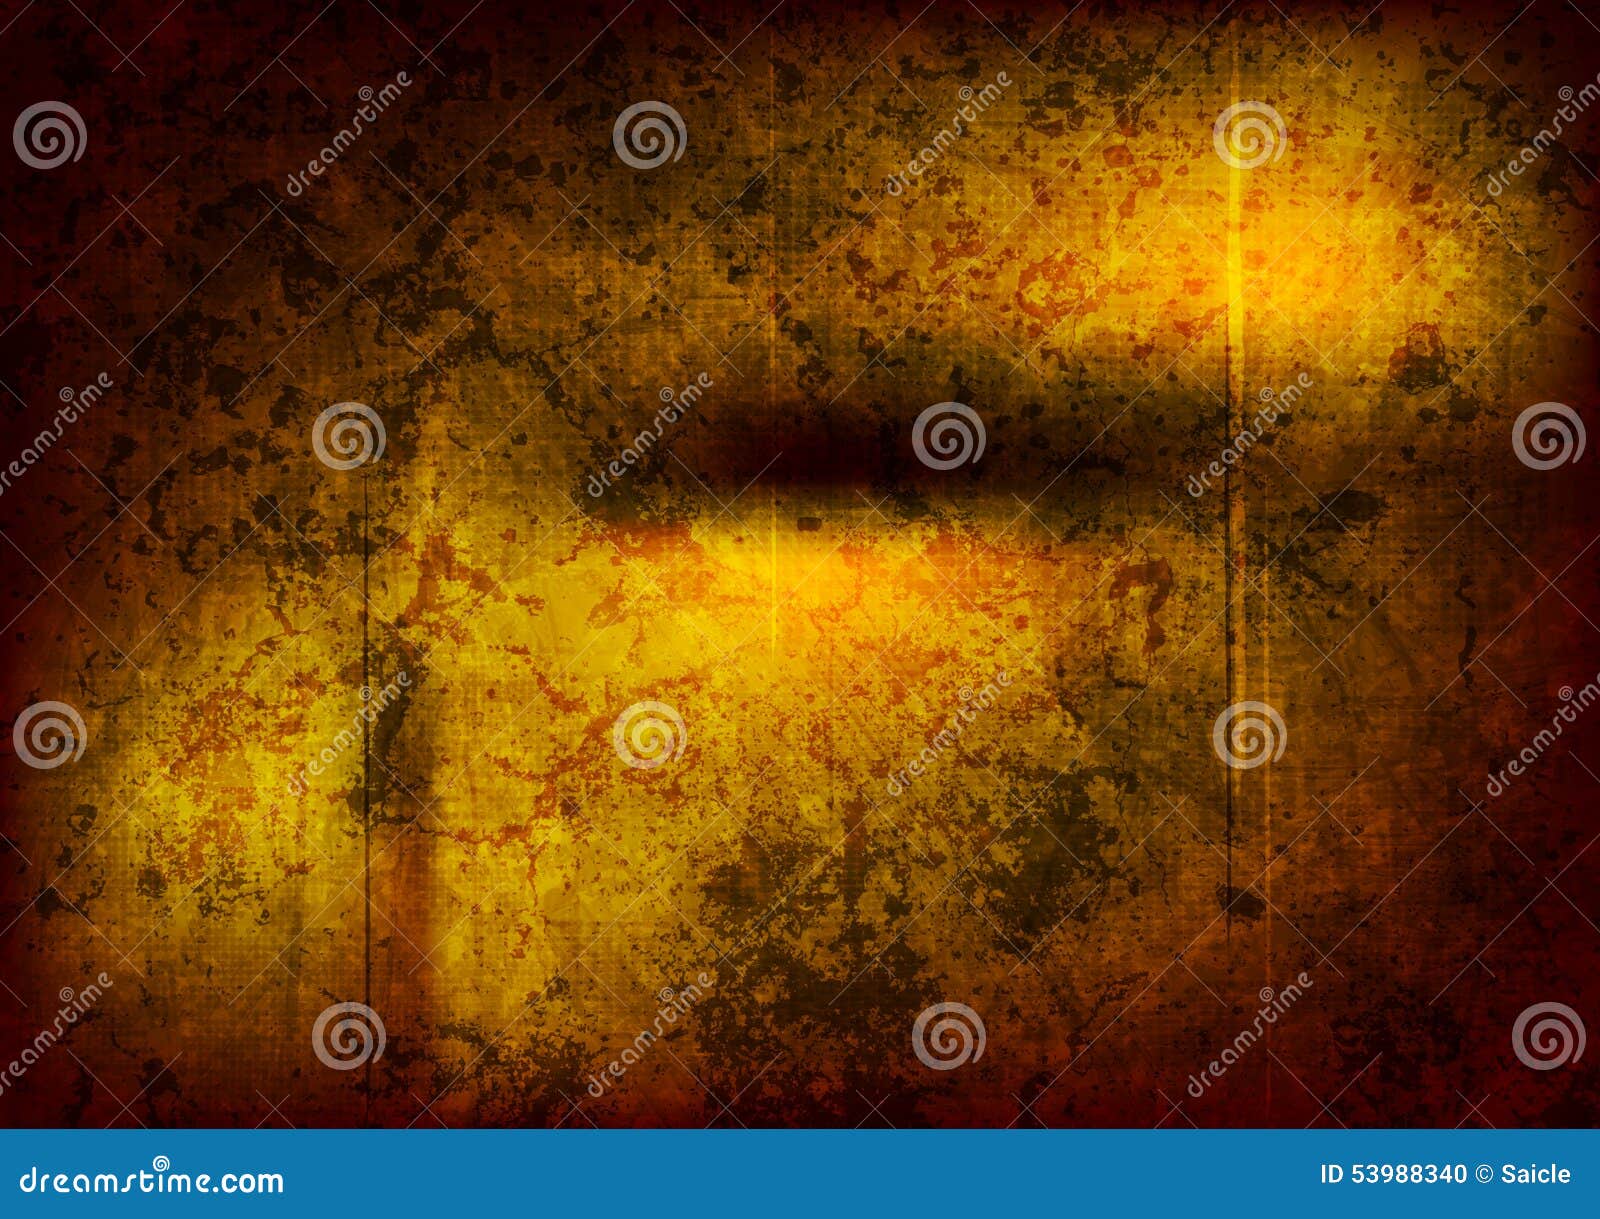 Grunge Abstract Vector Wall Texture Stock Vector - Illustration of